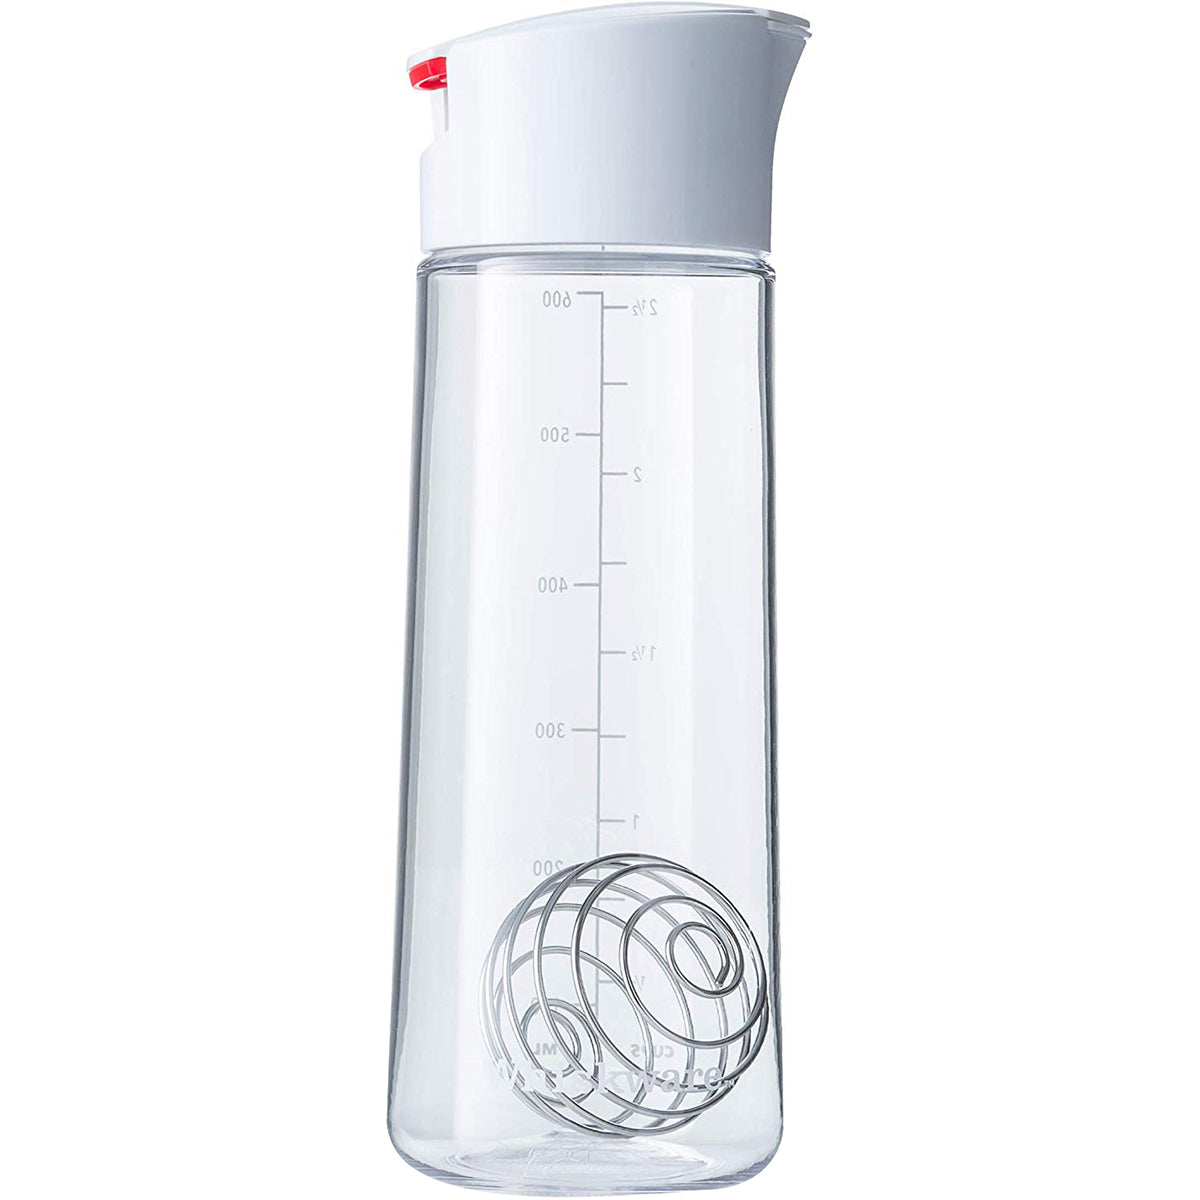 Whiskware Glass Salad Dressing Shaker with BlenderBall Wire Whisk - White/Red Whiskware